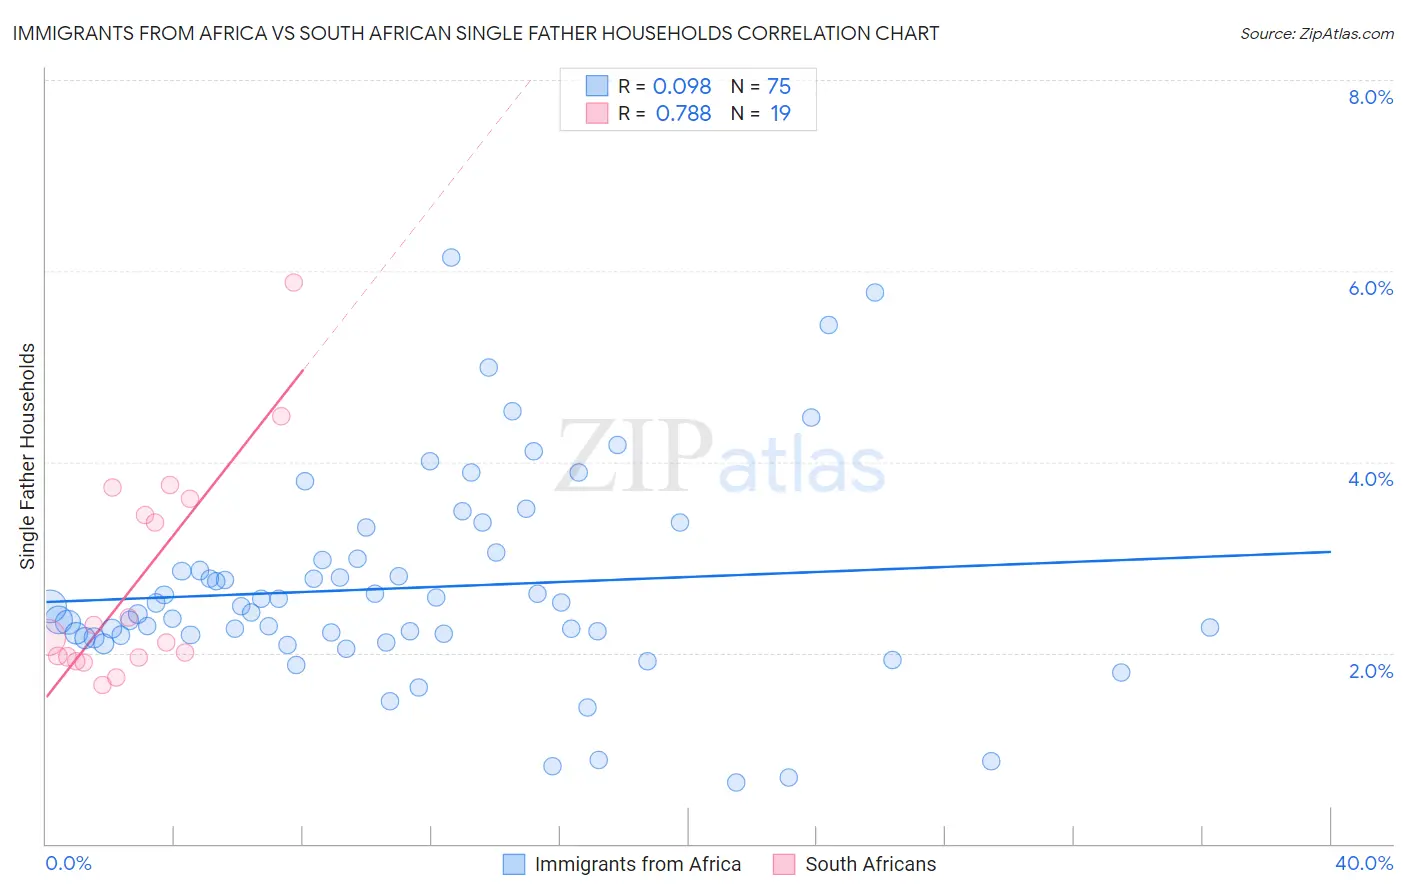 Immigrants from Africa vs South African Single Father Households